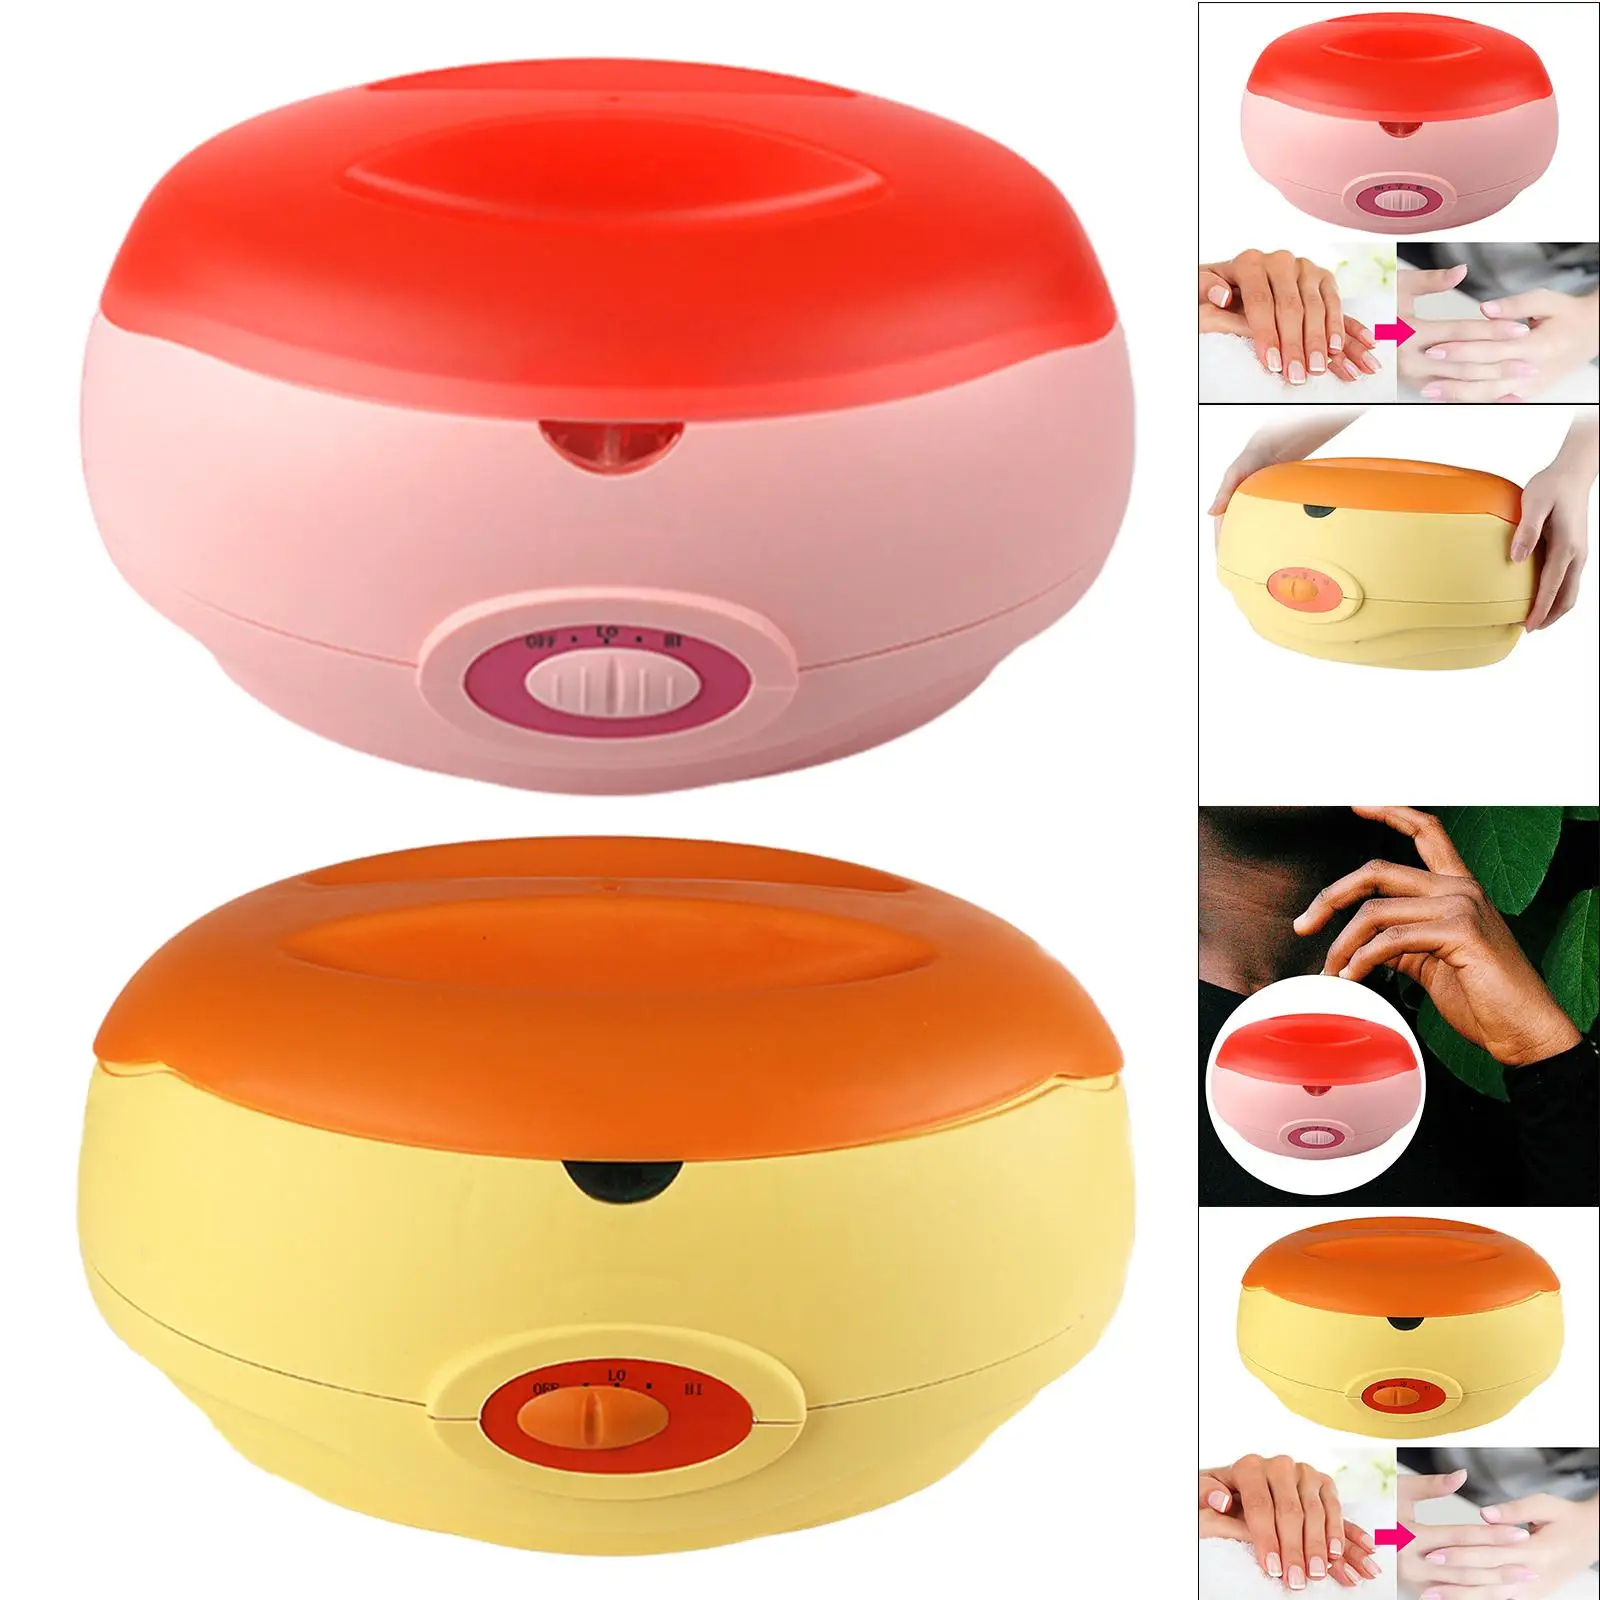   Machine for Hand and Feet Moisturizing  Salon SPA  Heater at Home with Lid   Bath Large Volume EU